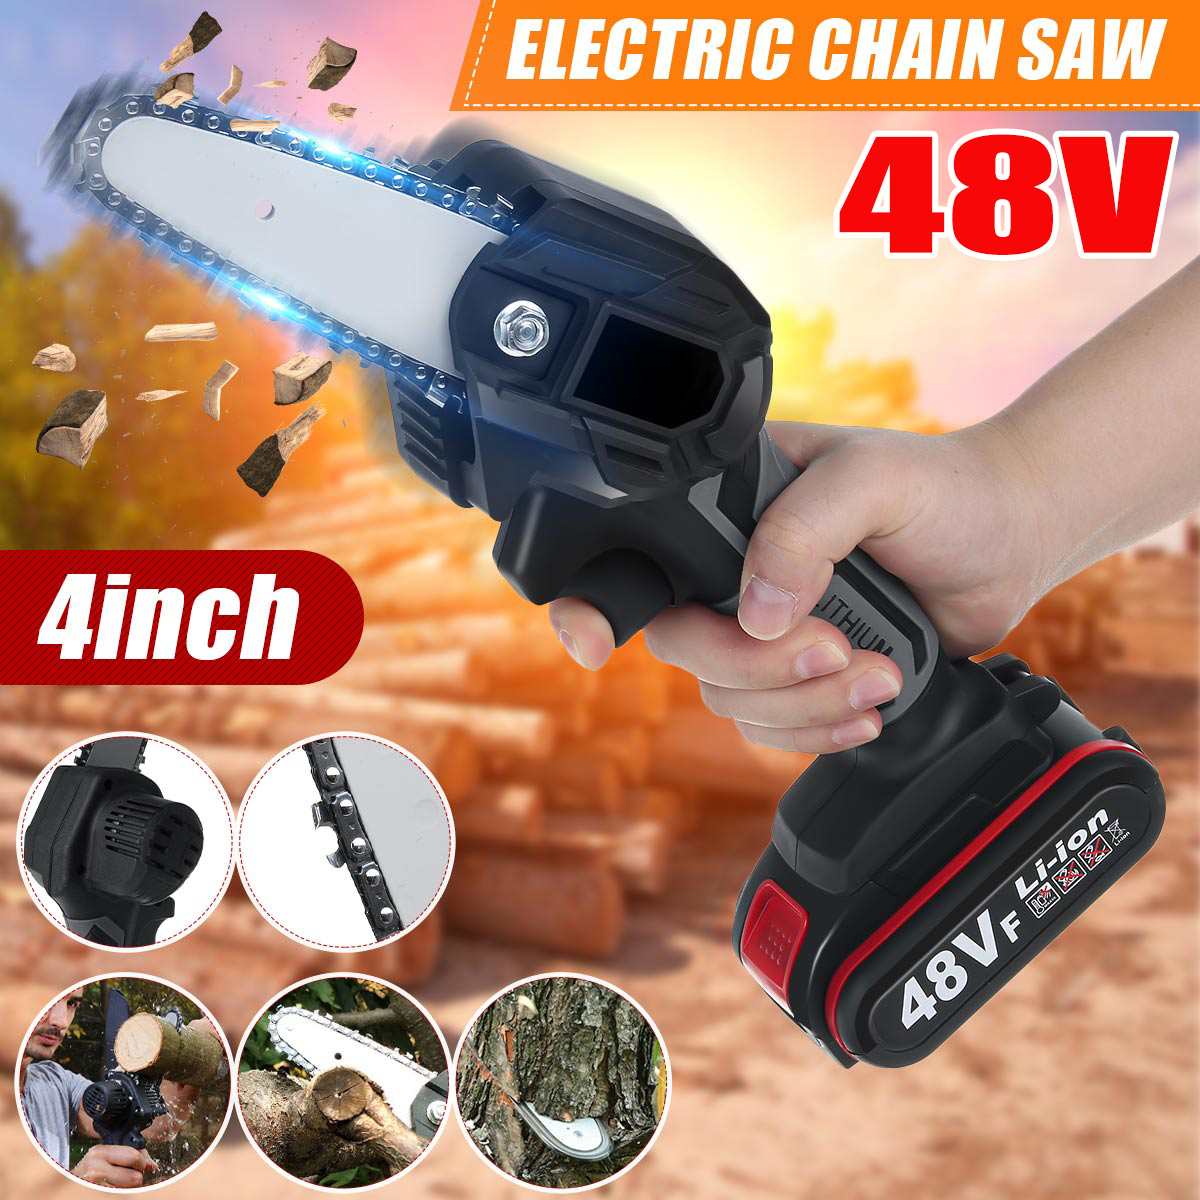 48V Cordless Electric Chain Saw 4inch Portable Electric Saw Woodworking Cutting DIY Tool Electric Pruning Saw With 1 Battery